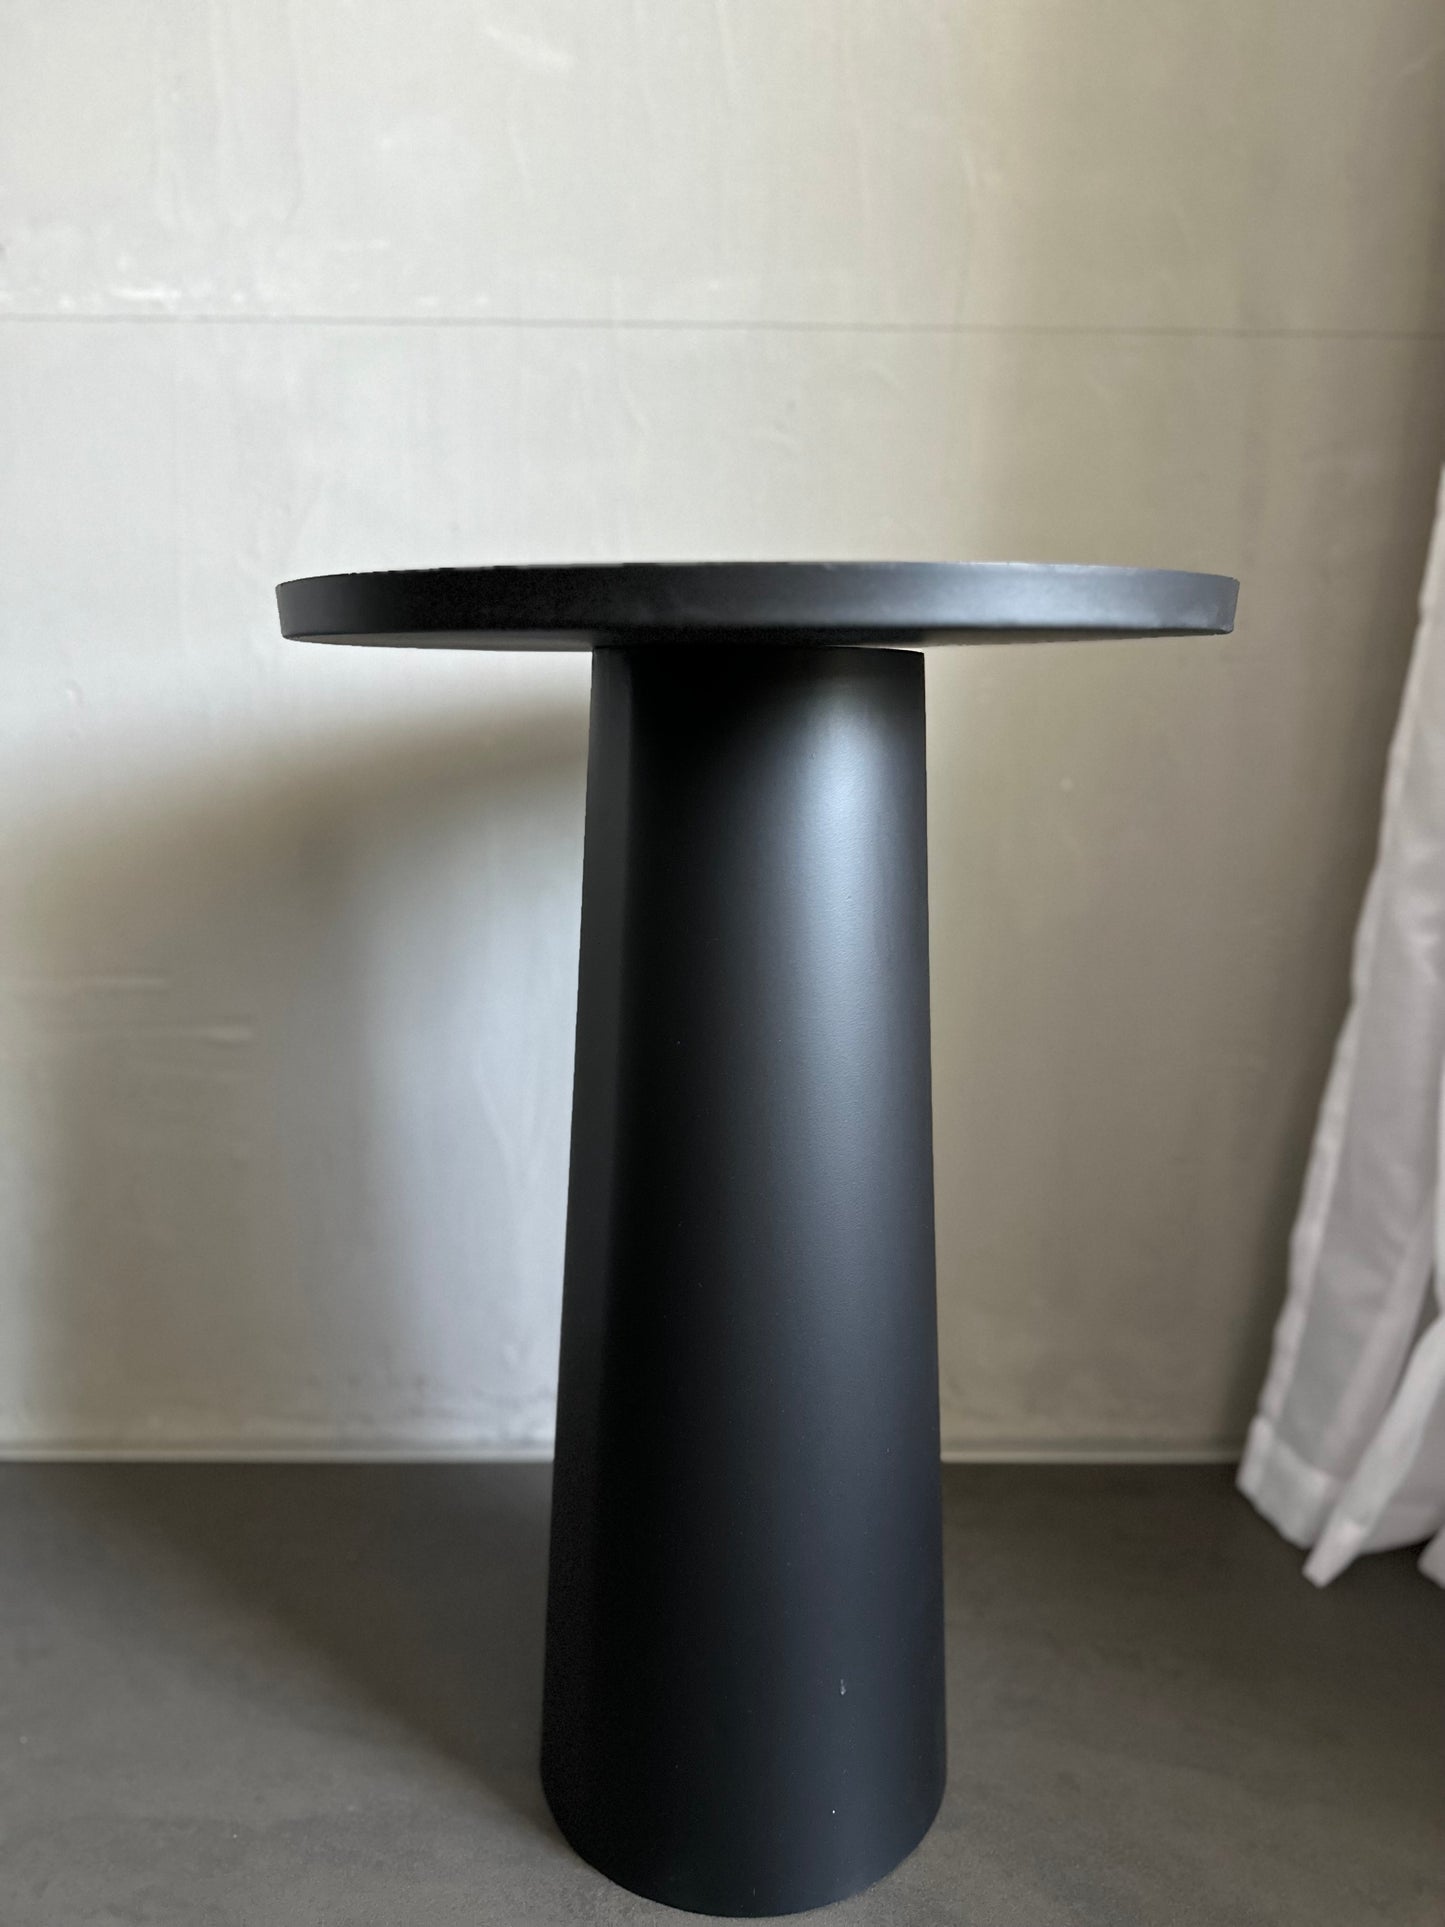 Table -